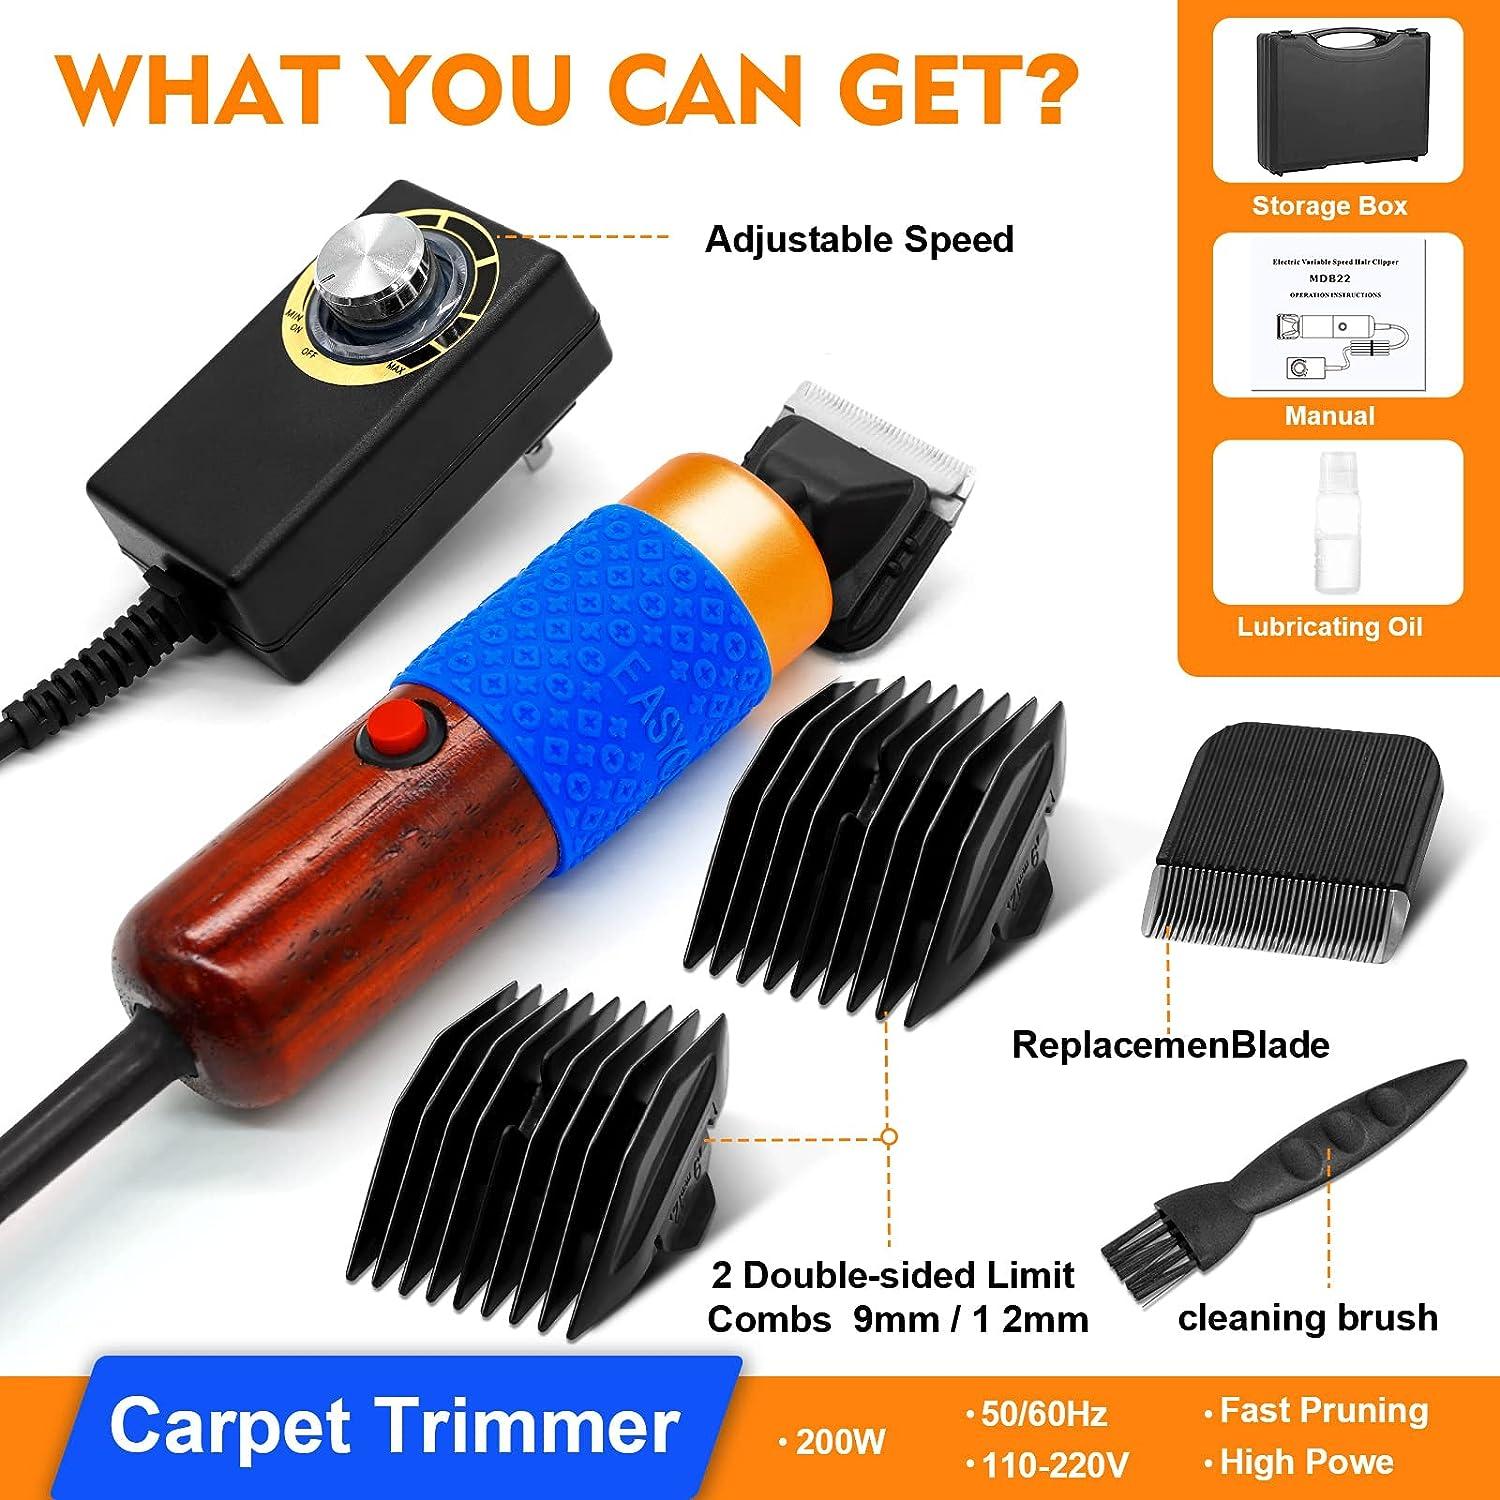 Electric Carpet Trimmer, Tufting Gun, Scissors with Shearing Guide